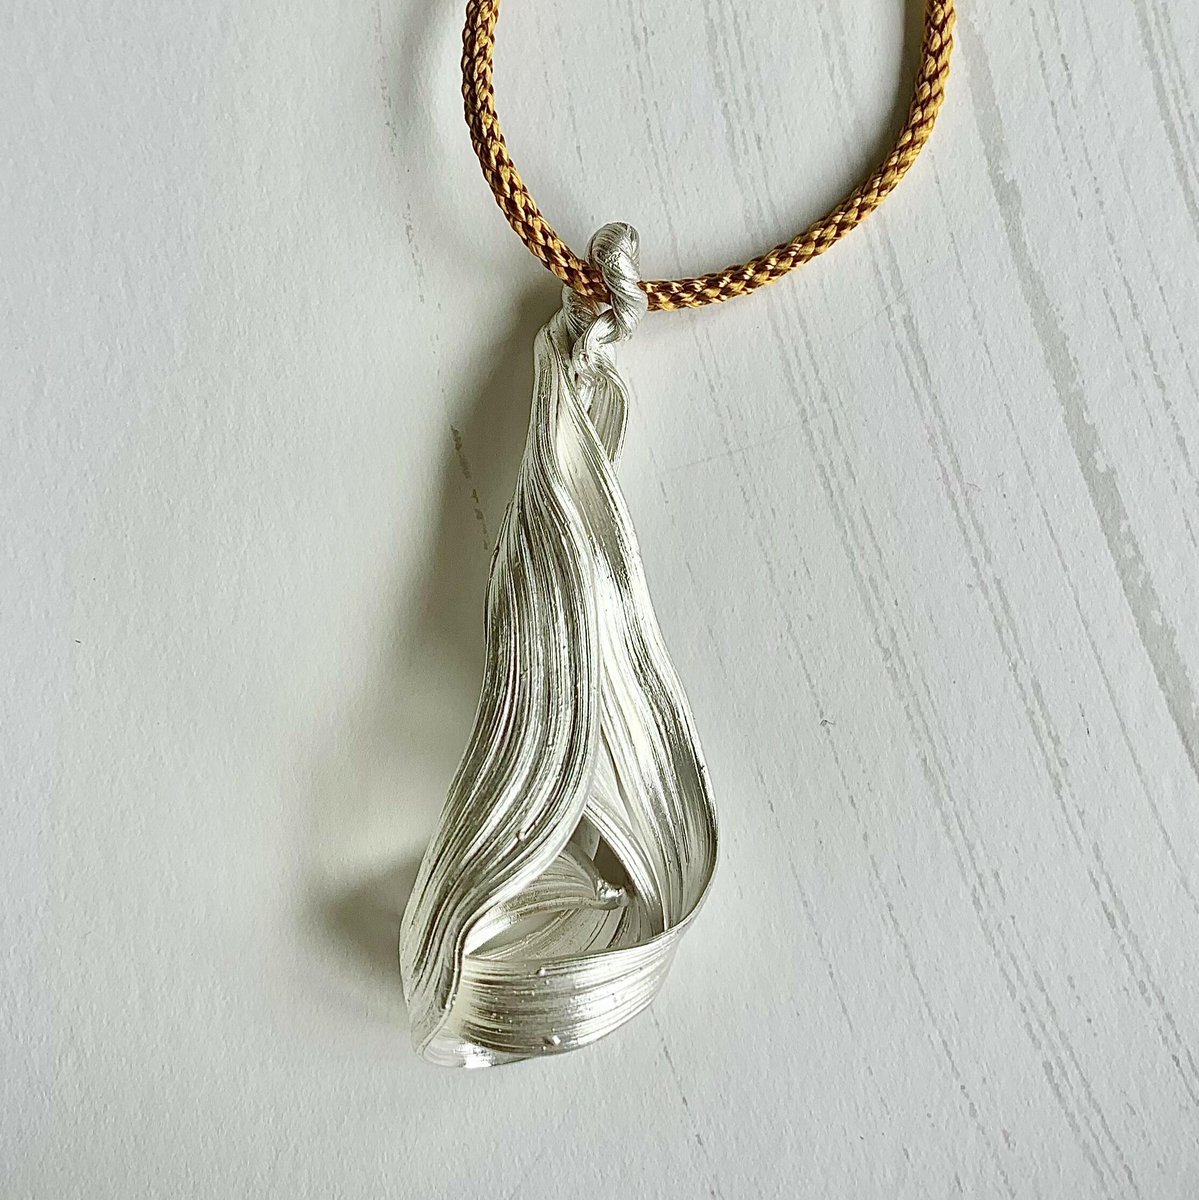 Today’s 'Pic of the Day' is a silver pendant by jeweller Kumiko Kihara (Artweeks listing 184; artweeks.org/v/kumiko-kihar…). She is exhibiting during the Oxford city week of the festival (11th-19th May). See more great art and plan venues to visit at artweeks.org